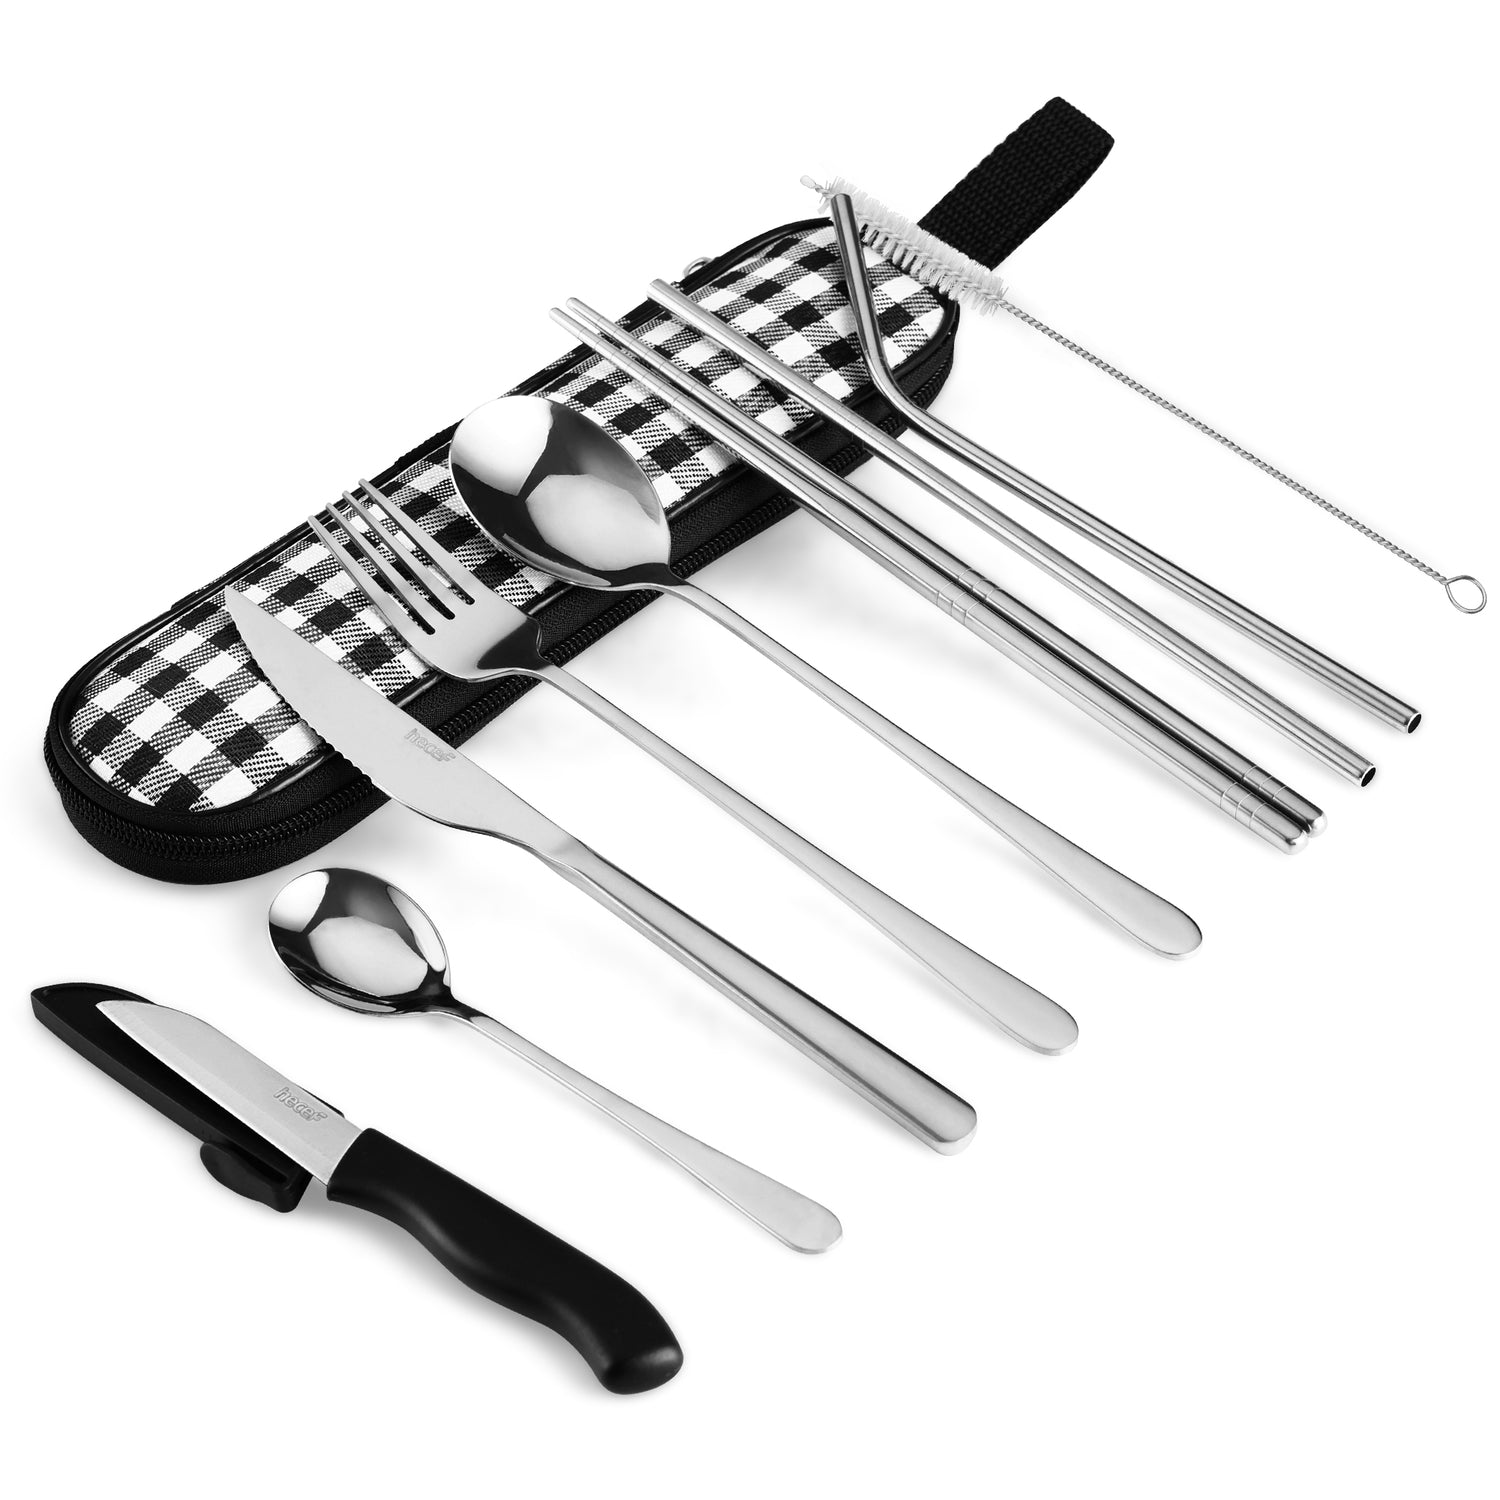 Travel Utensils With Case 8piece Reusable Camping Silverware Set Portable  Stainl